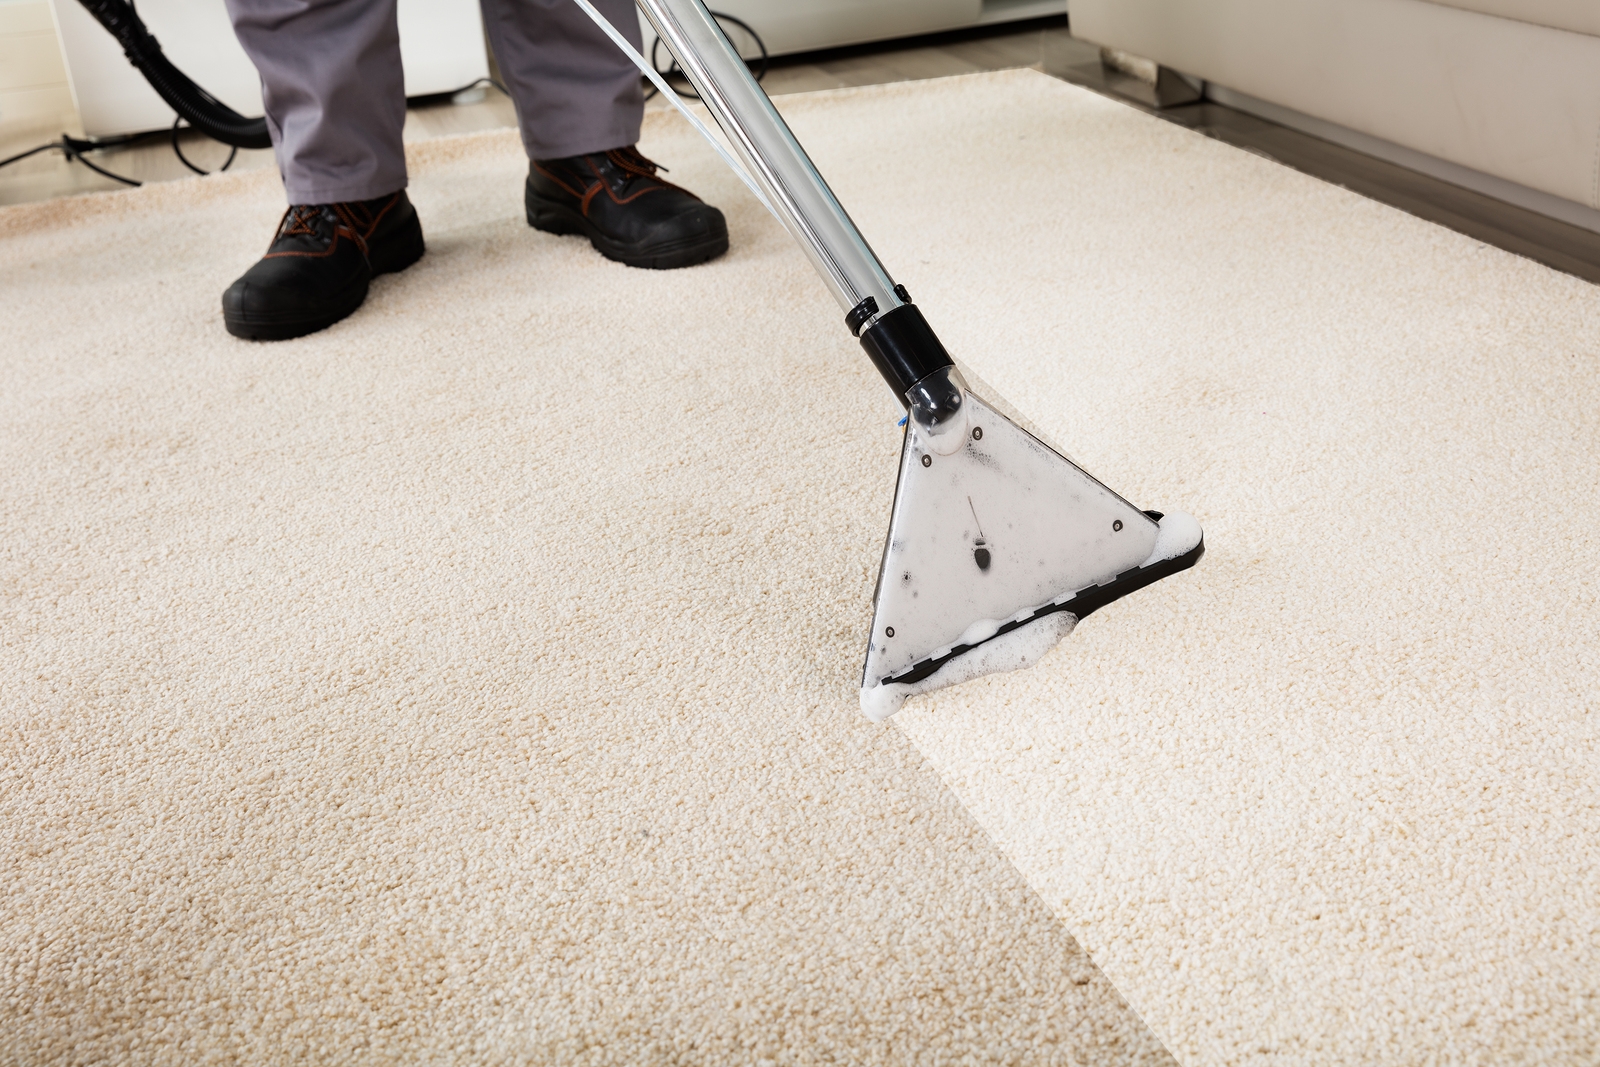 Carpet Cleaning in Toms River - How Hot Water Extraction Works